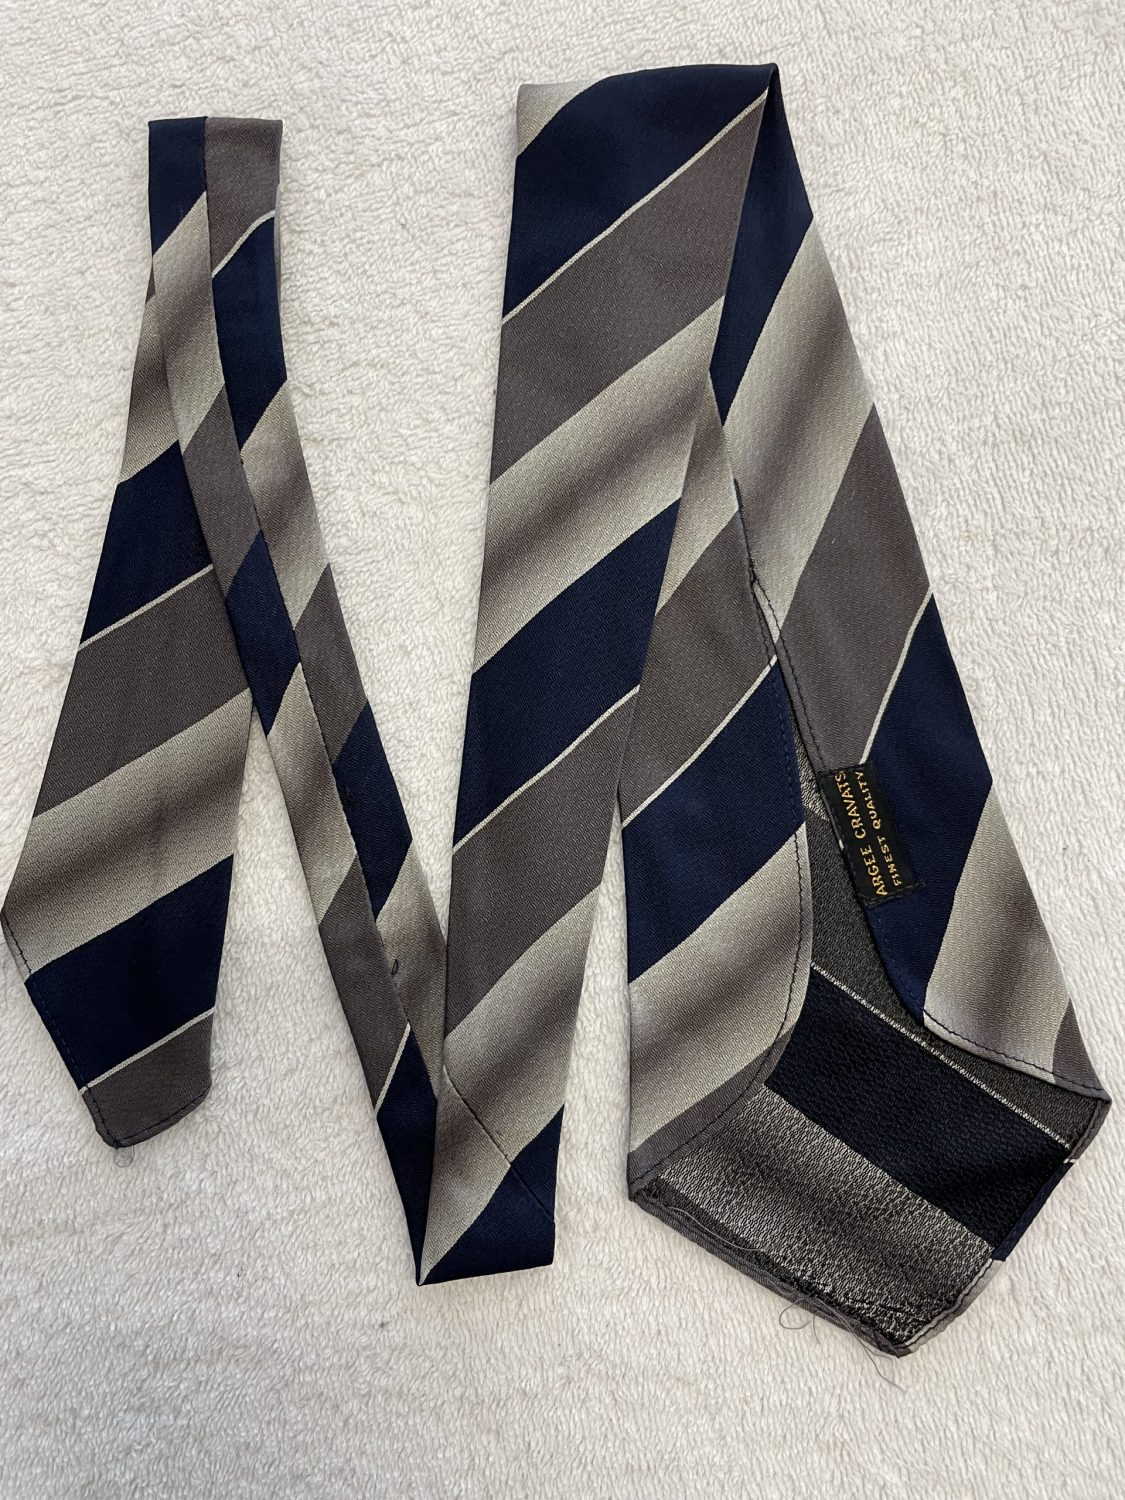 DEADSTOCK 1930S 'ARGEE CRAVATS' BRAND 5 X VINTAGE BOLD STRIPED TIES ...